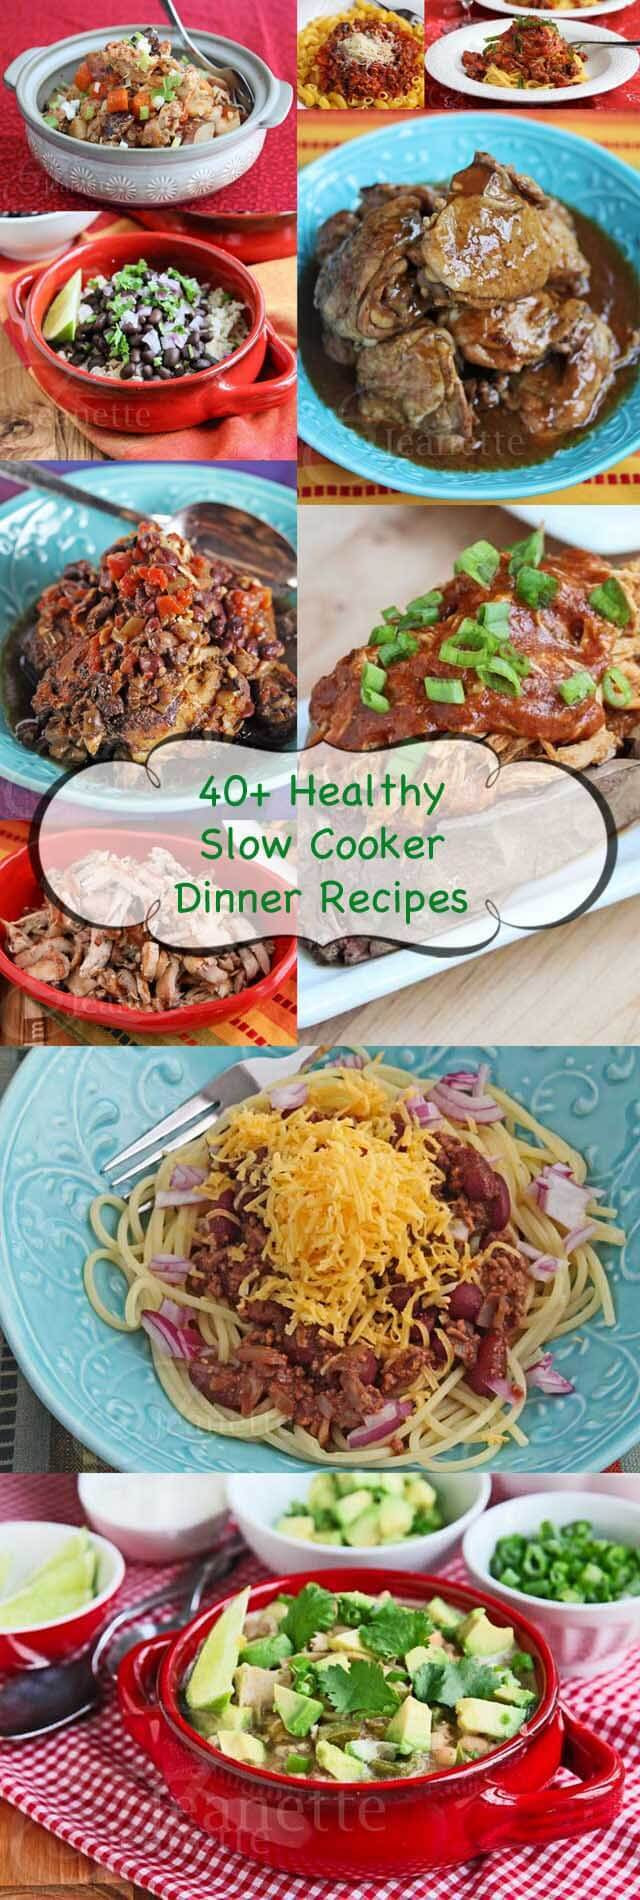 Healthy Slow Cooker Dinner Recipes 20 Ideas for 40 Healthy Slow Cooker Dinner Recipes Jeanette S